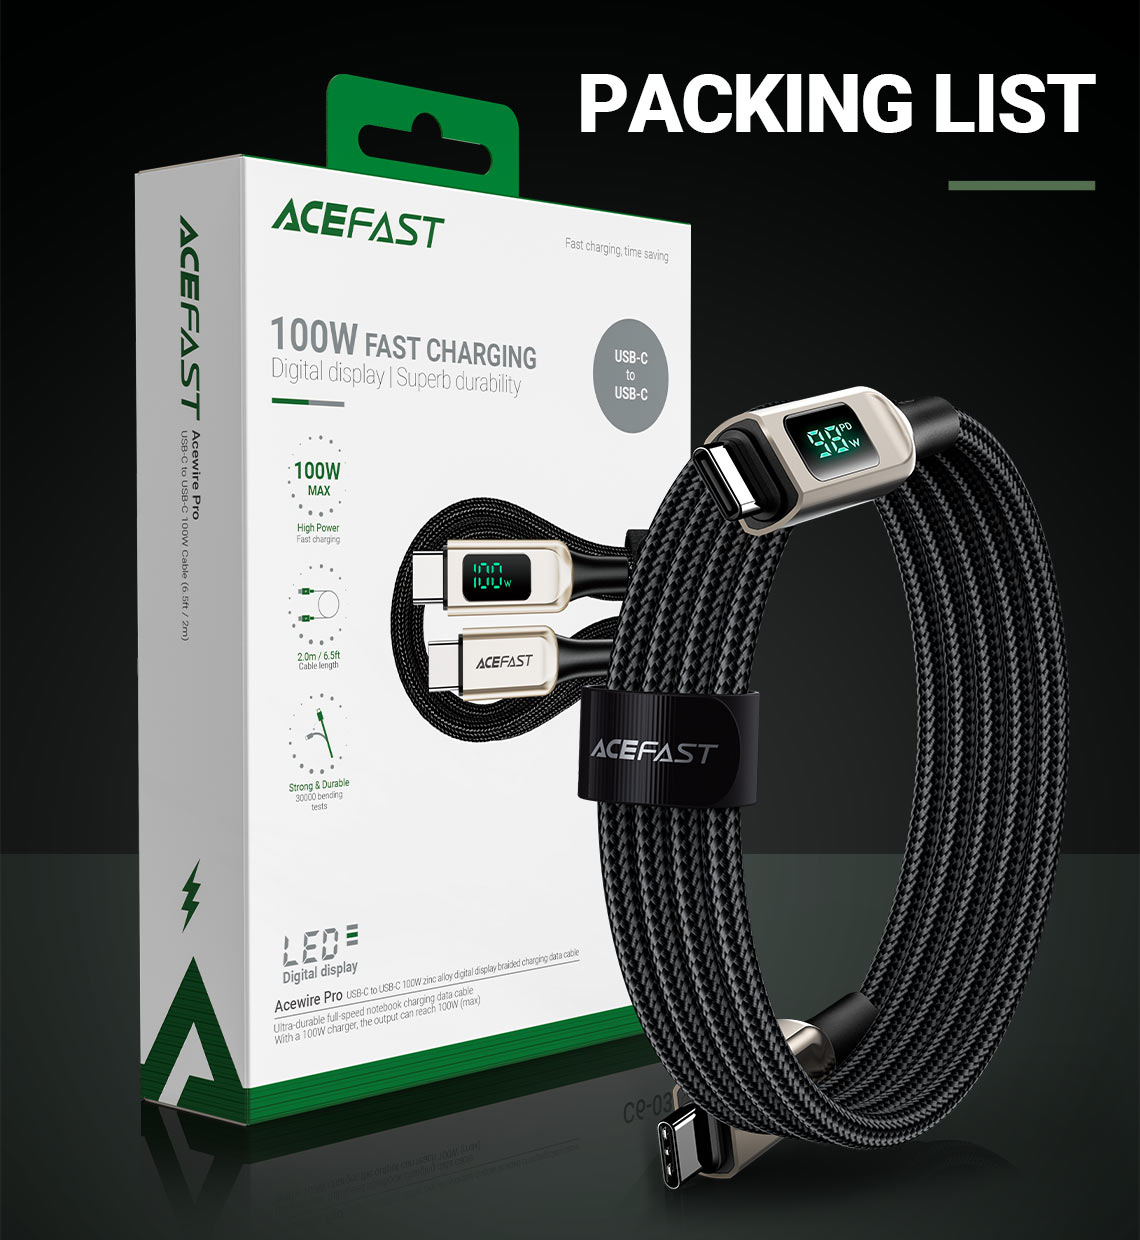 ACEFAST C6 03 100W USB C to USB C Charging Data Cable 2M 10